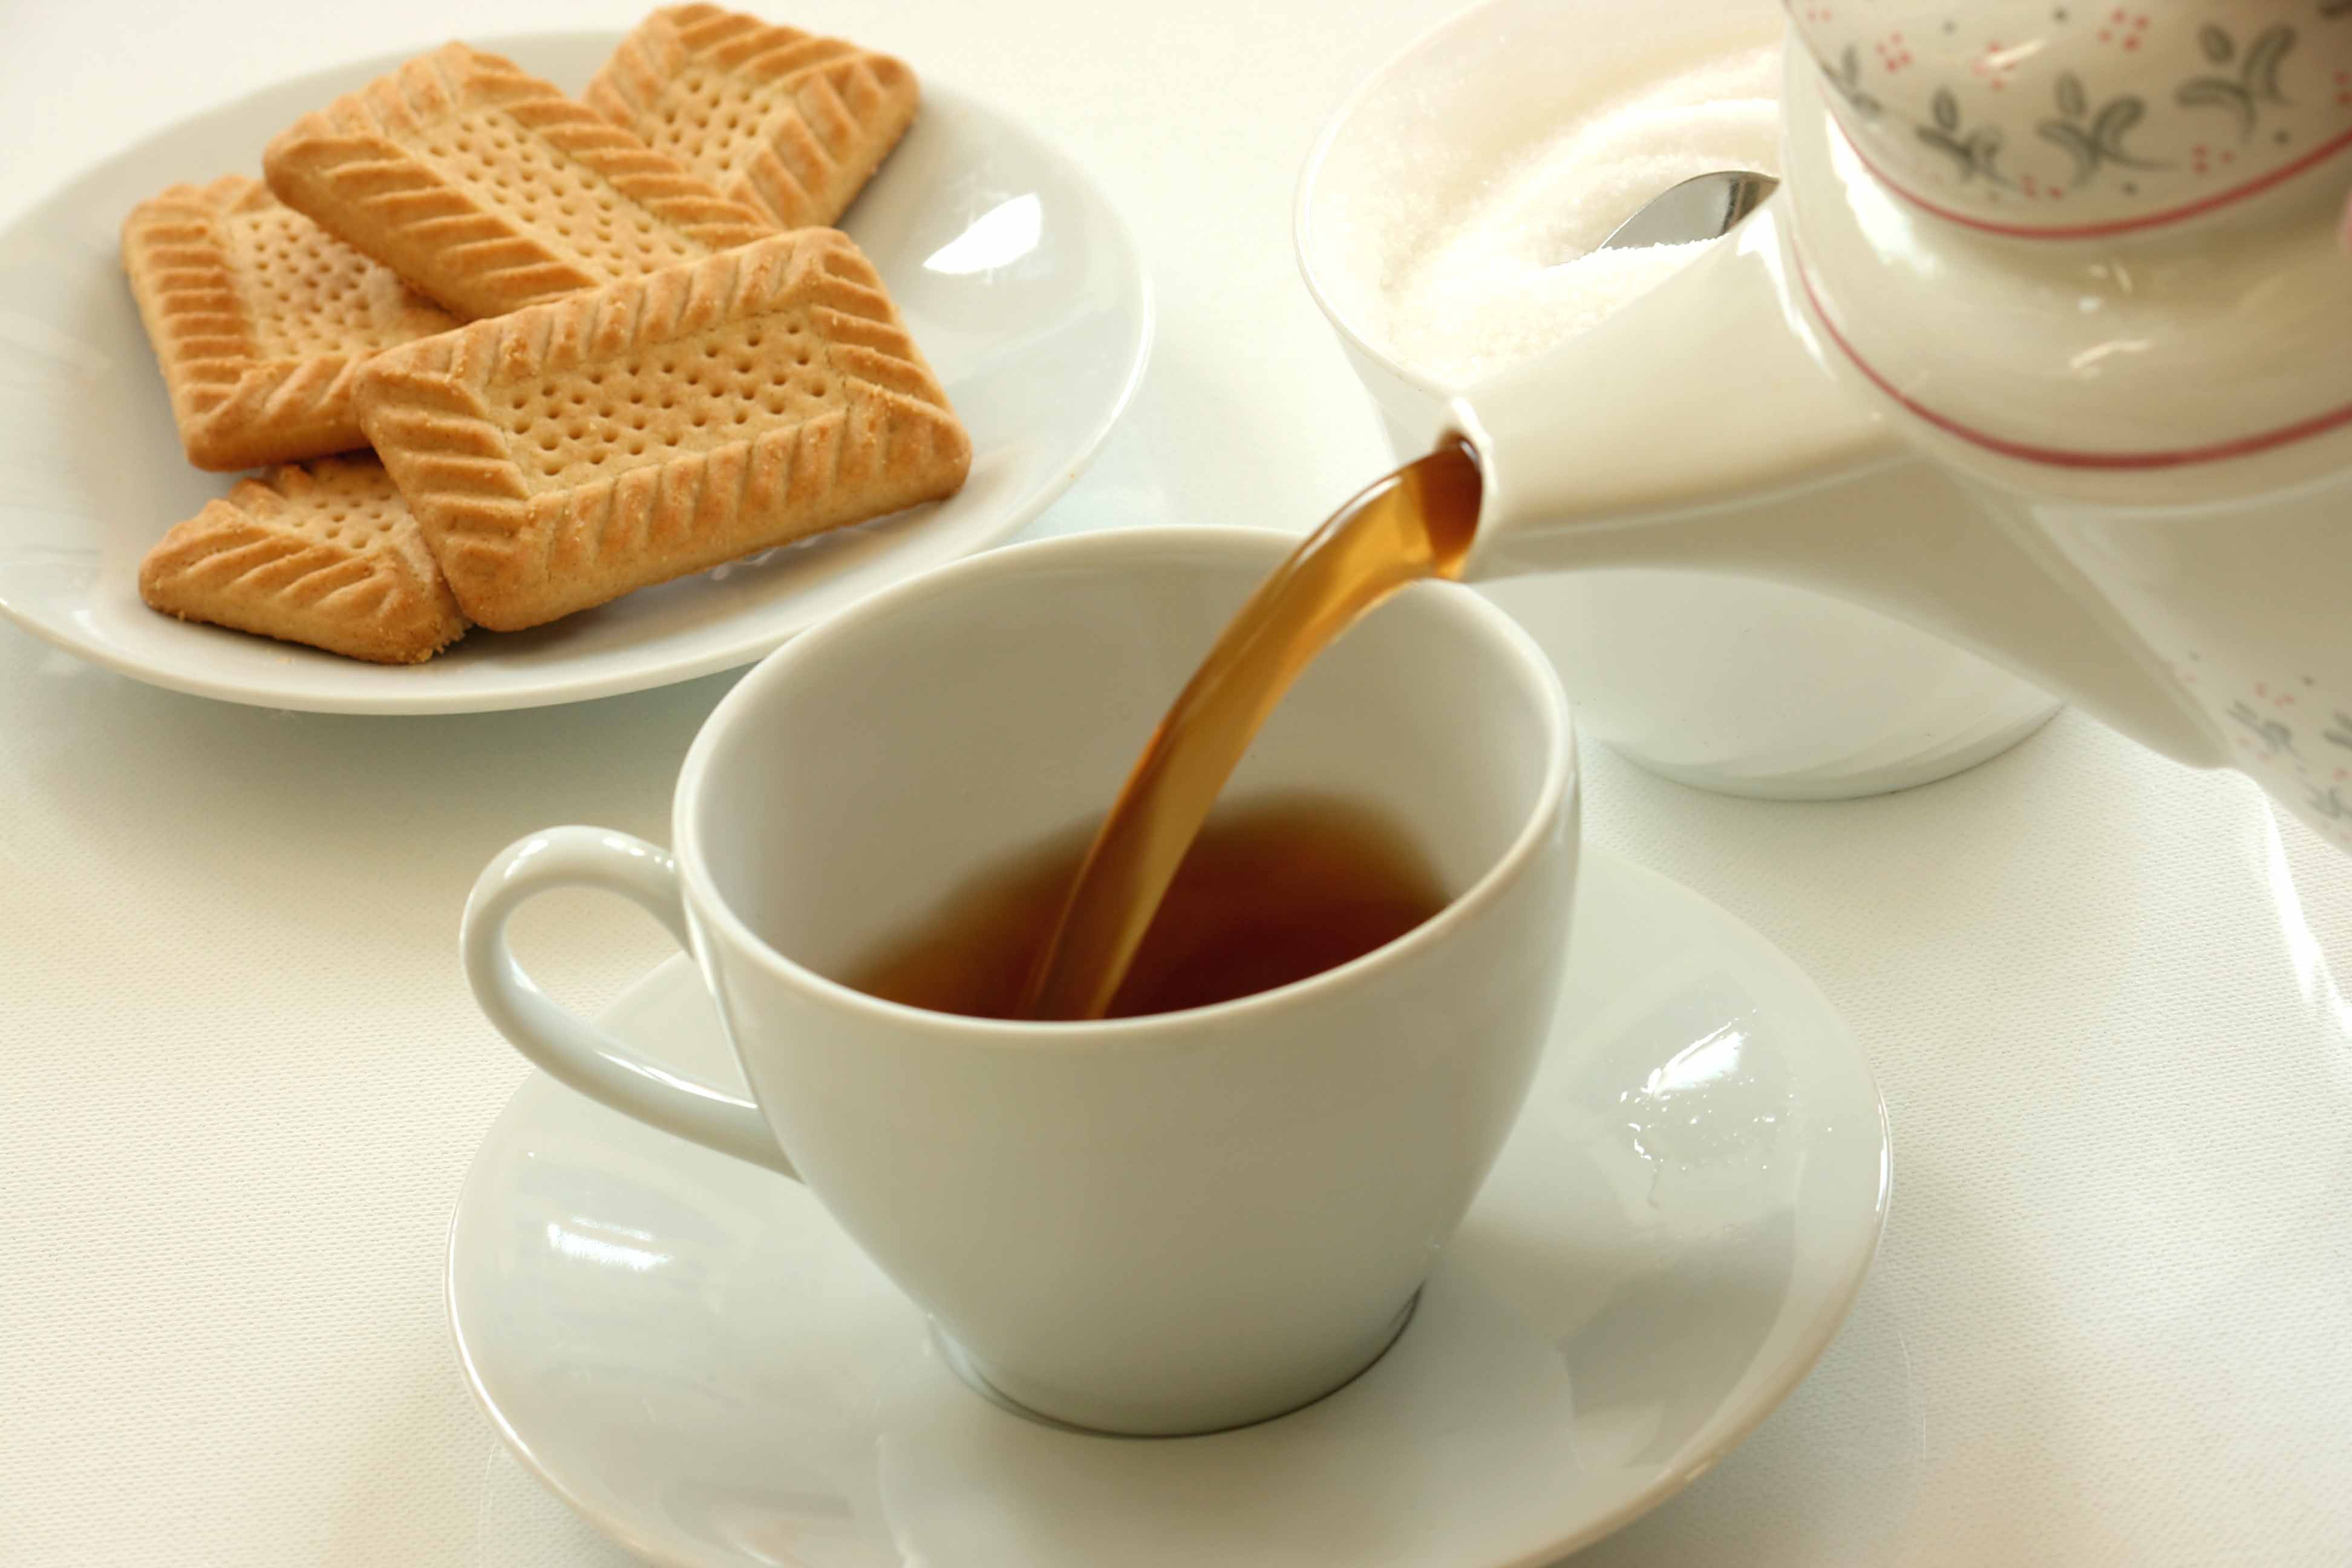 Good Morning Hd Wallpaper Free Download - Good Morning With Tea And Biscuits - HD Wallpaper 